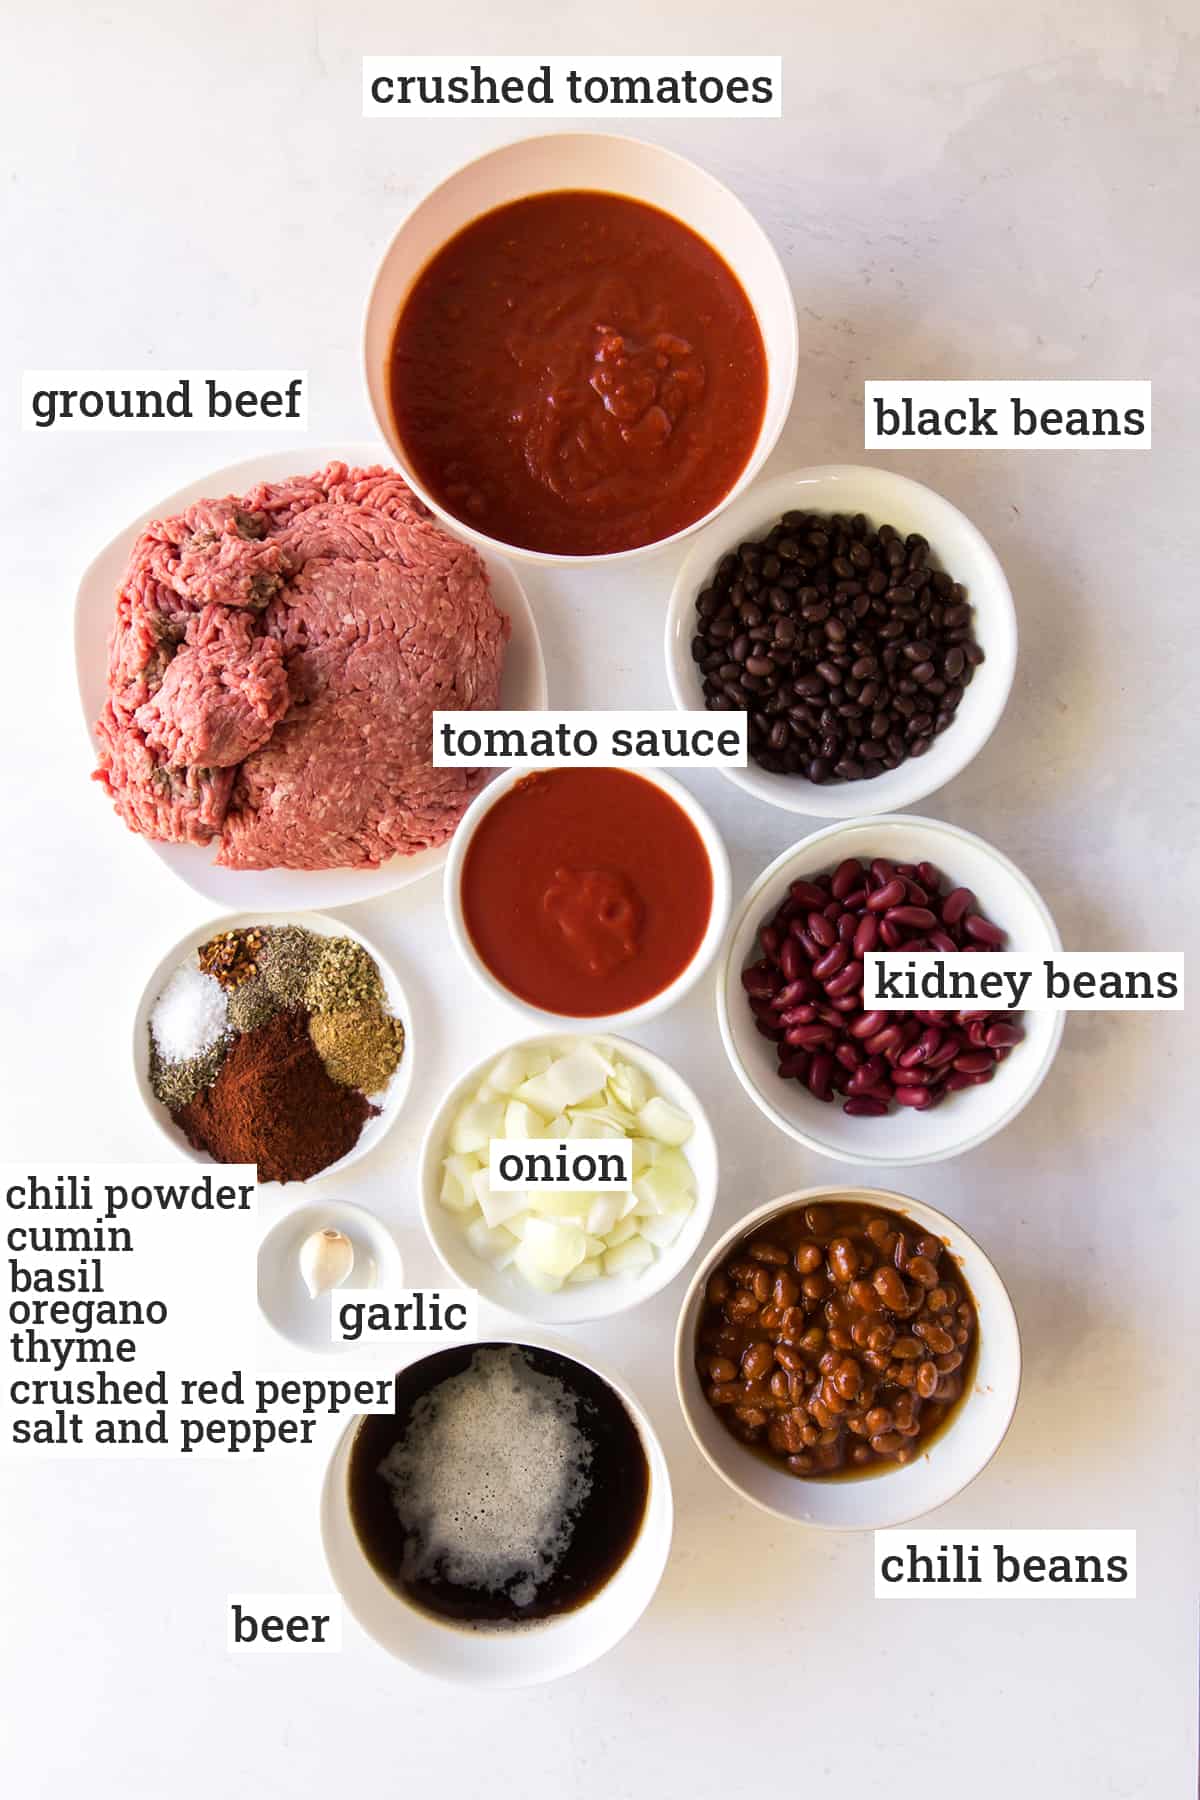 All the ingredients needed to make Halftime Chili with text overlay.